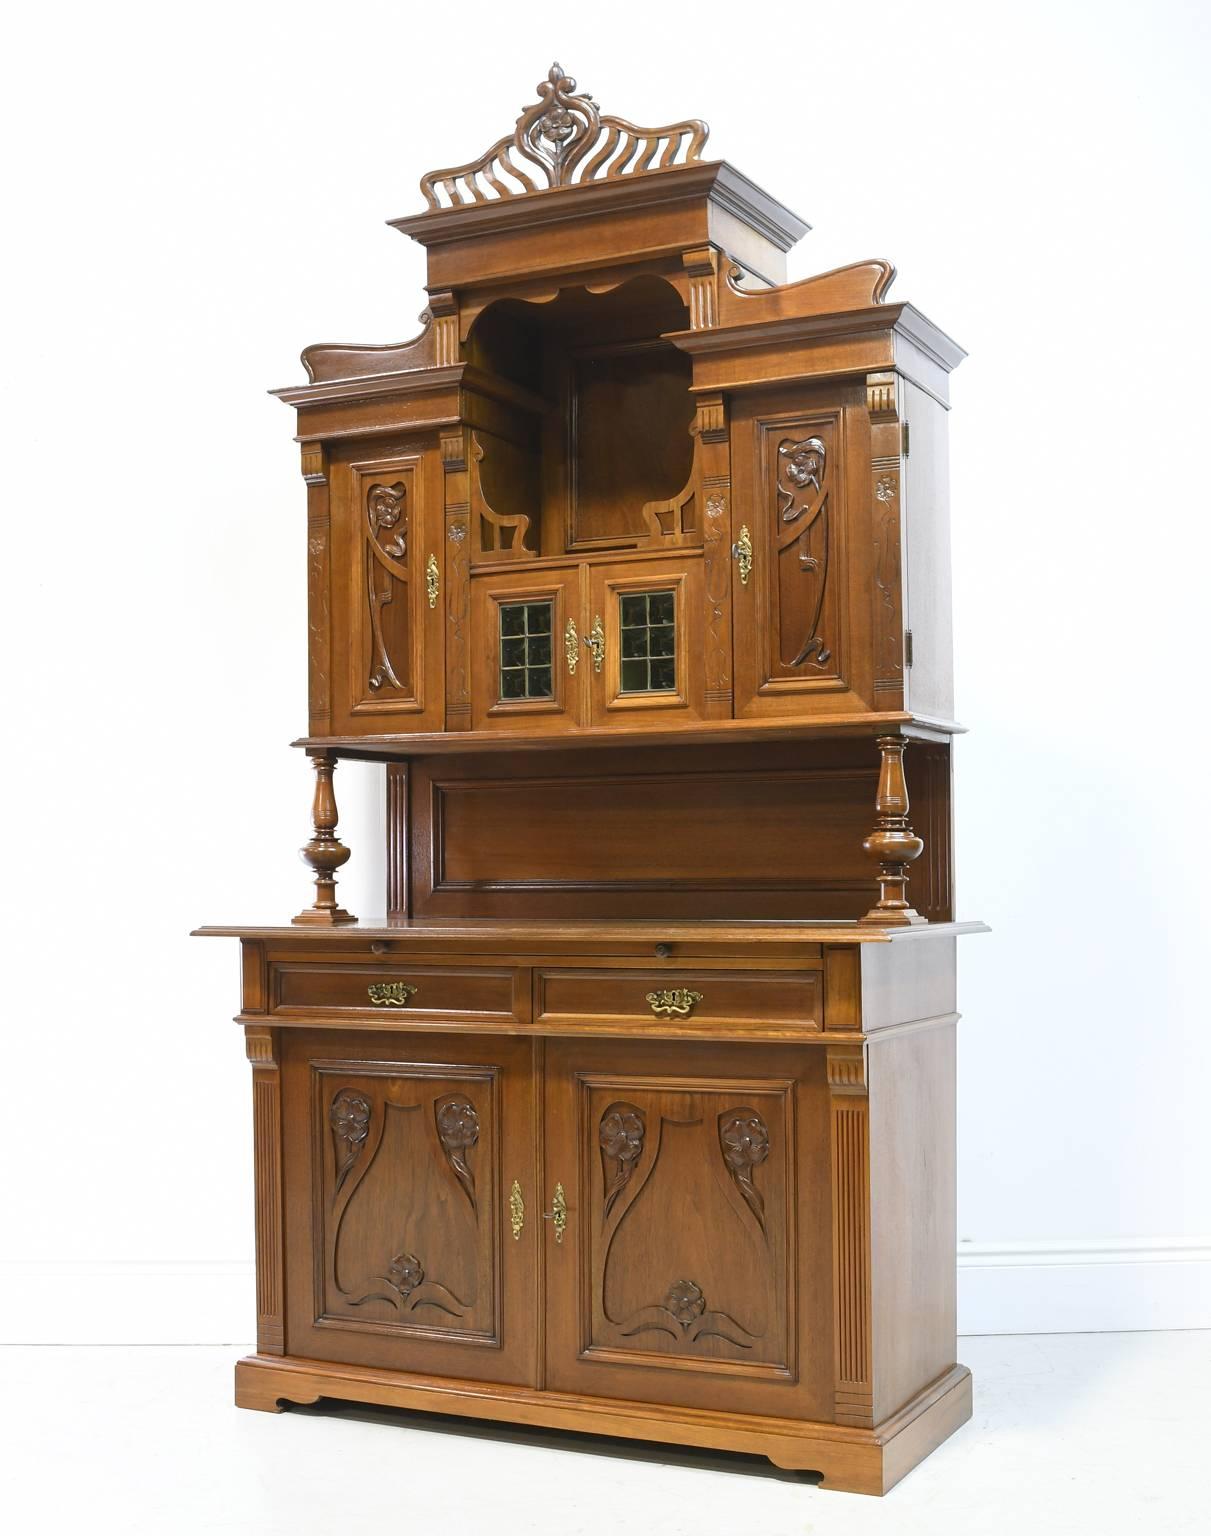 A  beautiful late 19th or early 20th century Art Nouveau buffet with the quintessential organic motifs that exemplify the Art Nouveau movement, including carved cyma curves, and floral & foliate carvings. Features custom curved tinted glass with